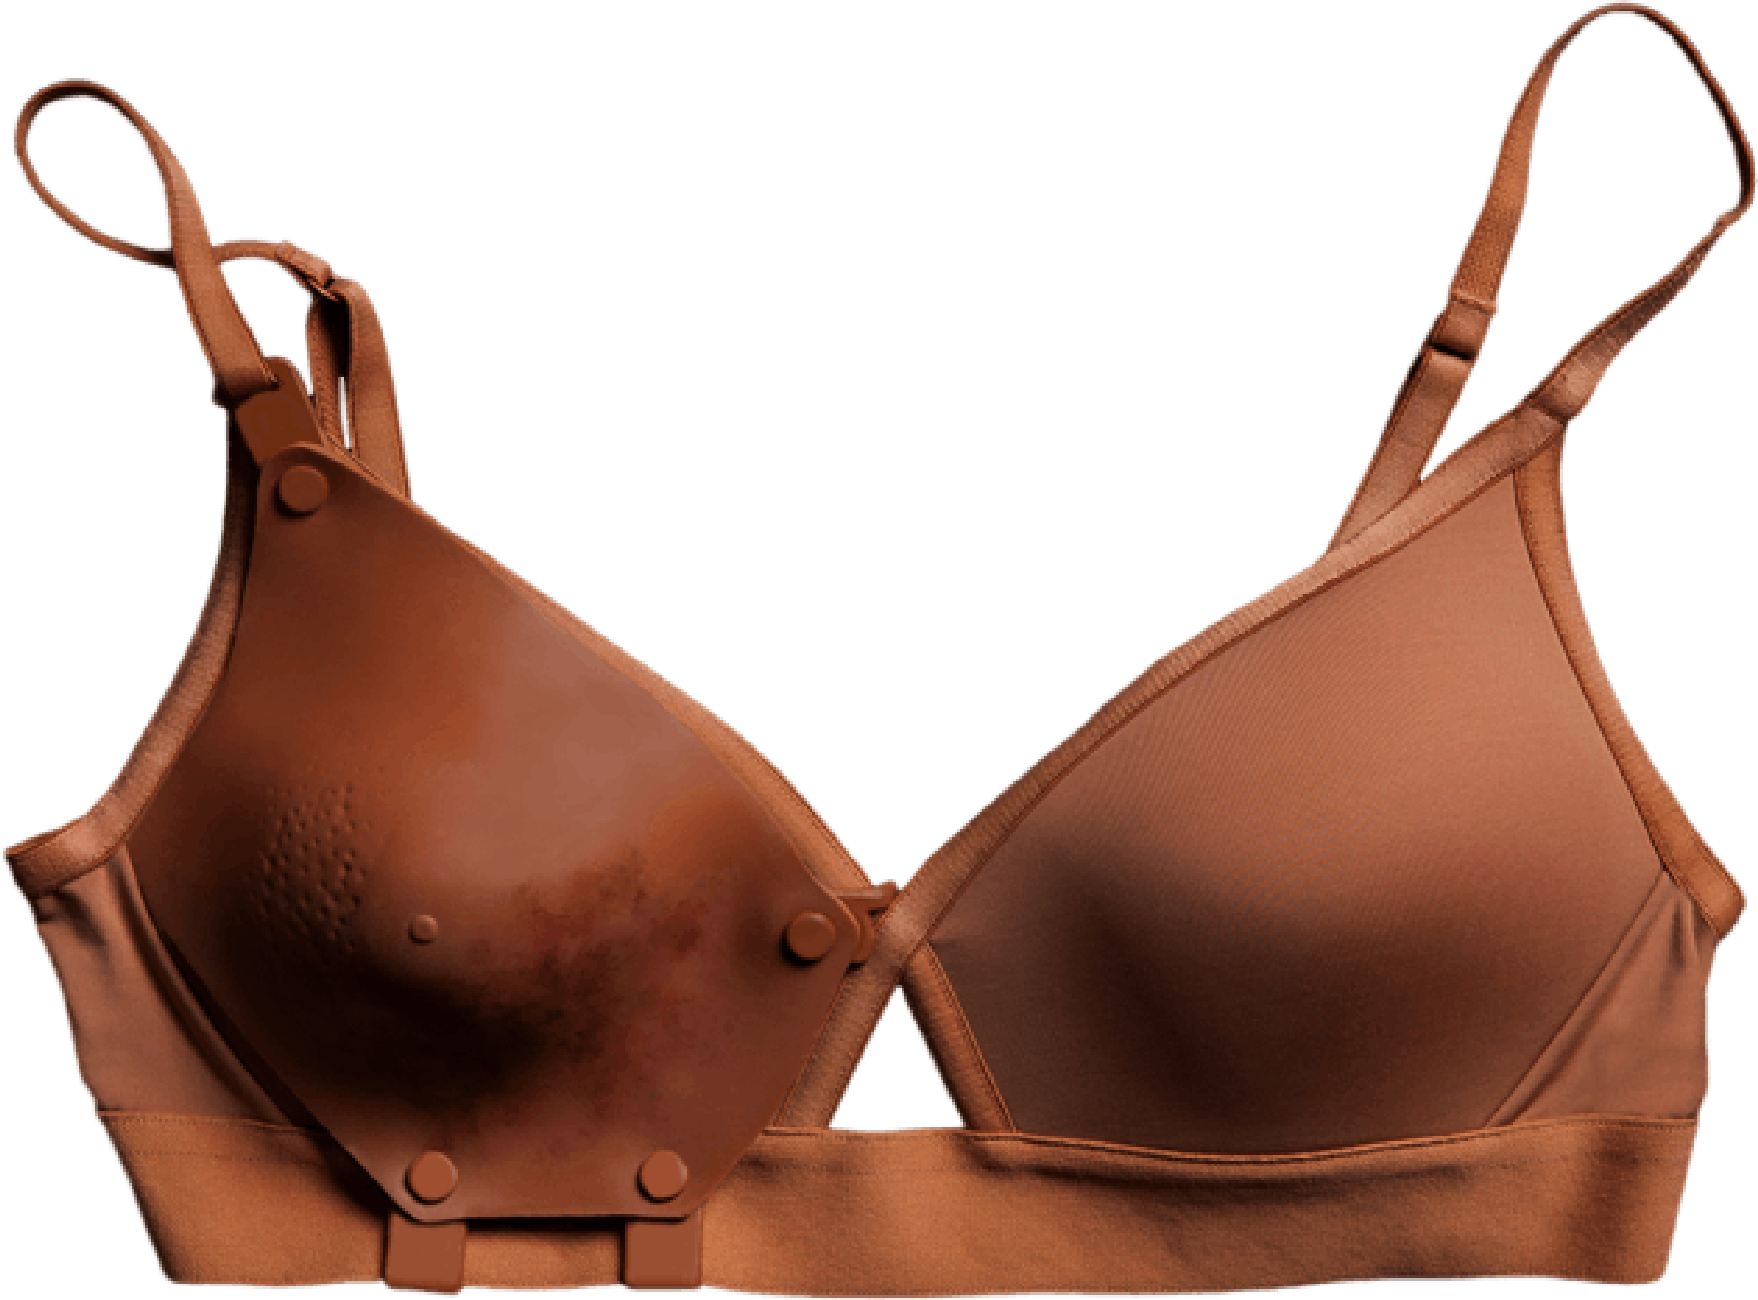 A brown Stage Zero Collection bra with breast cancer symptoms replicated on one of the bra’s cups.